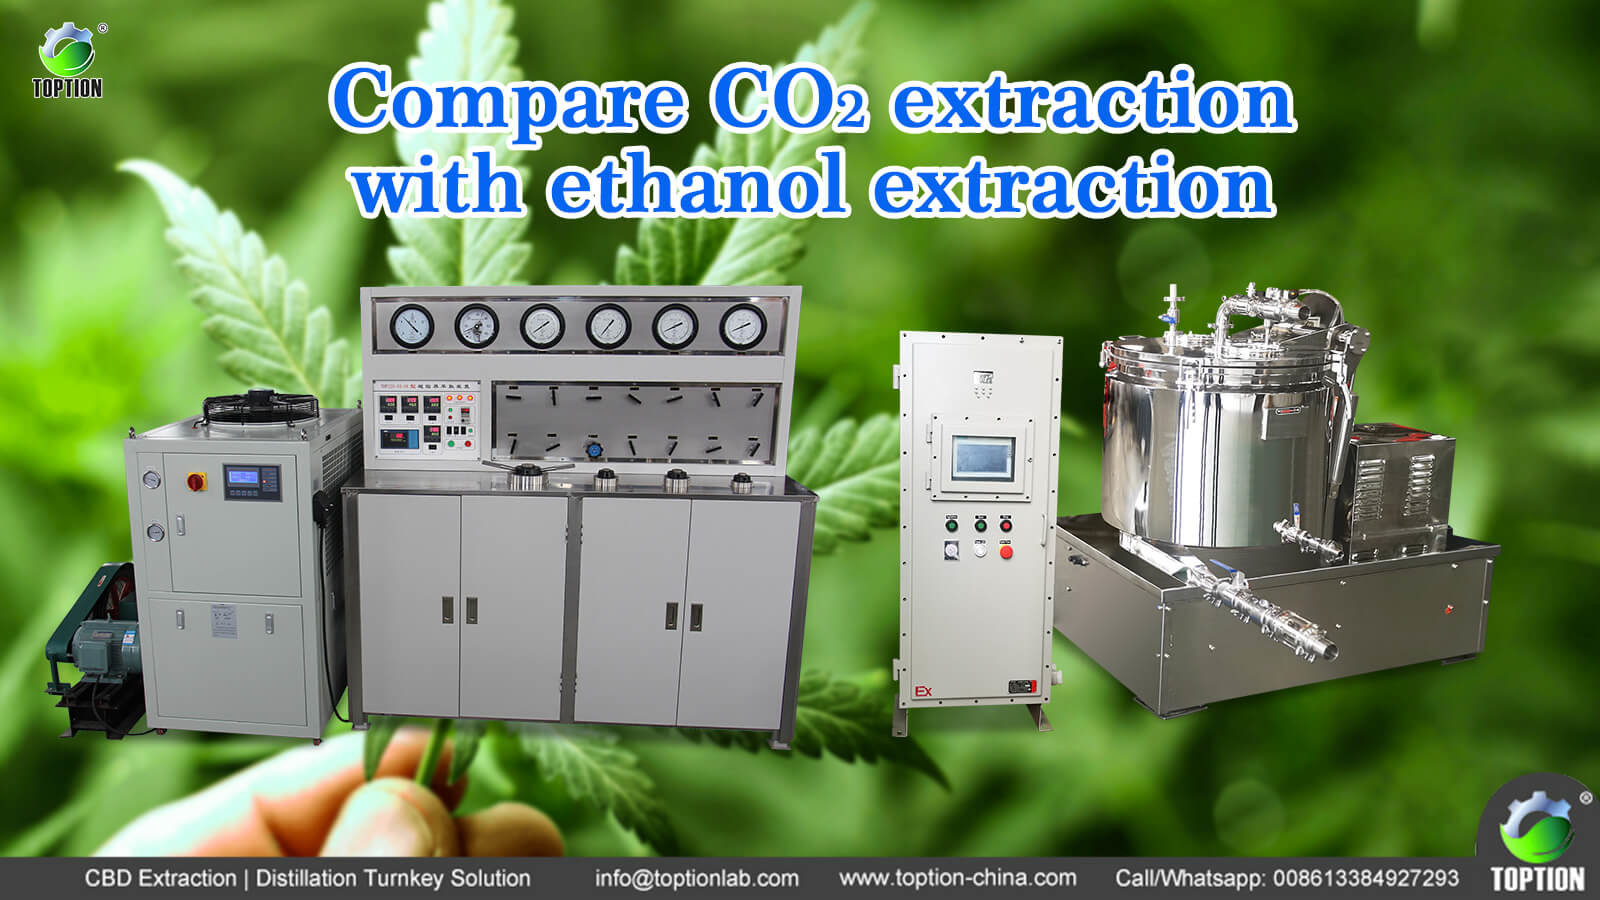 latest company news about If compare CO2 extraction with ethanol extraction, which one is better and why?  0